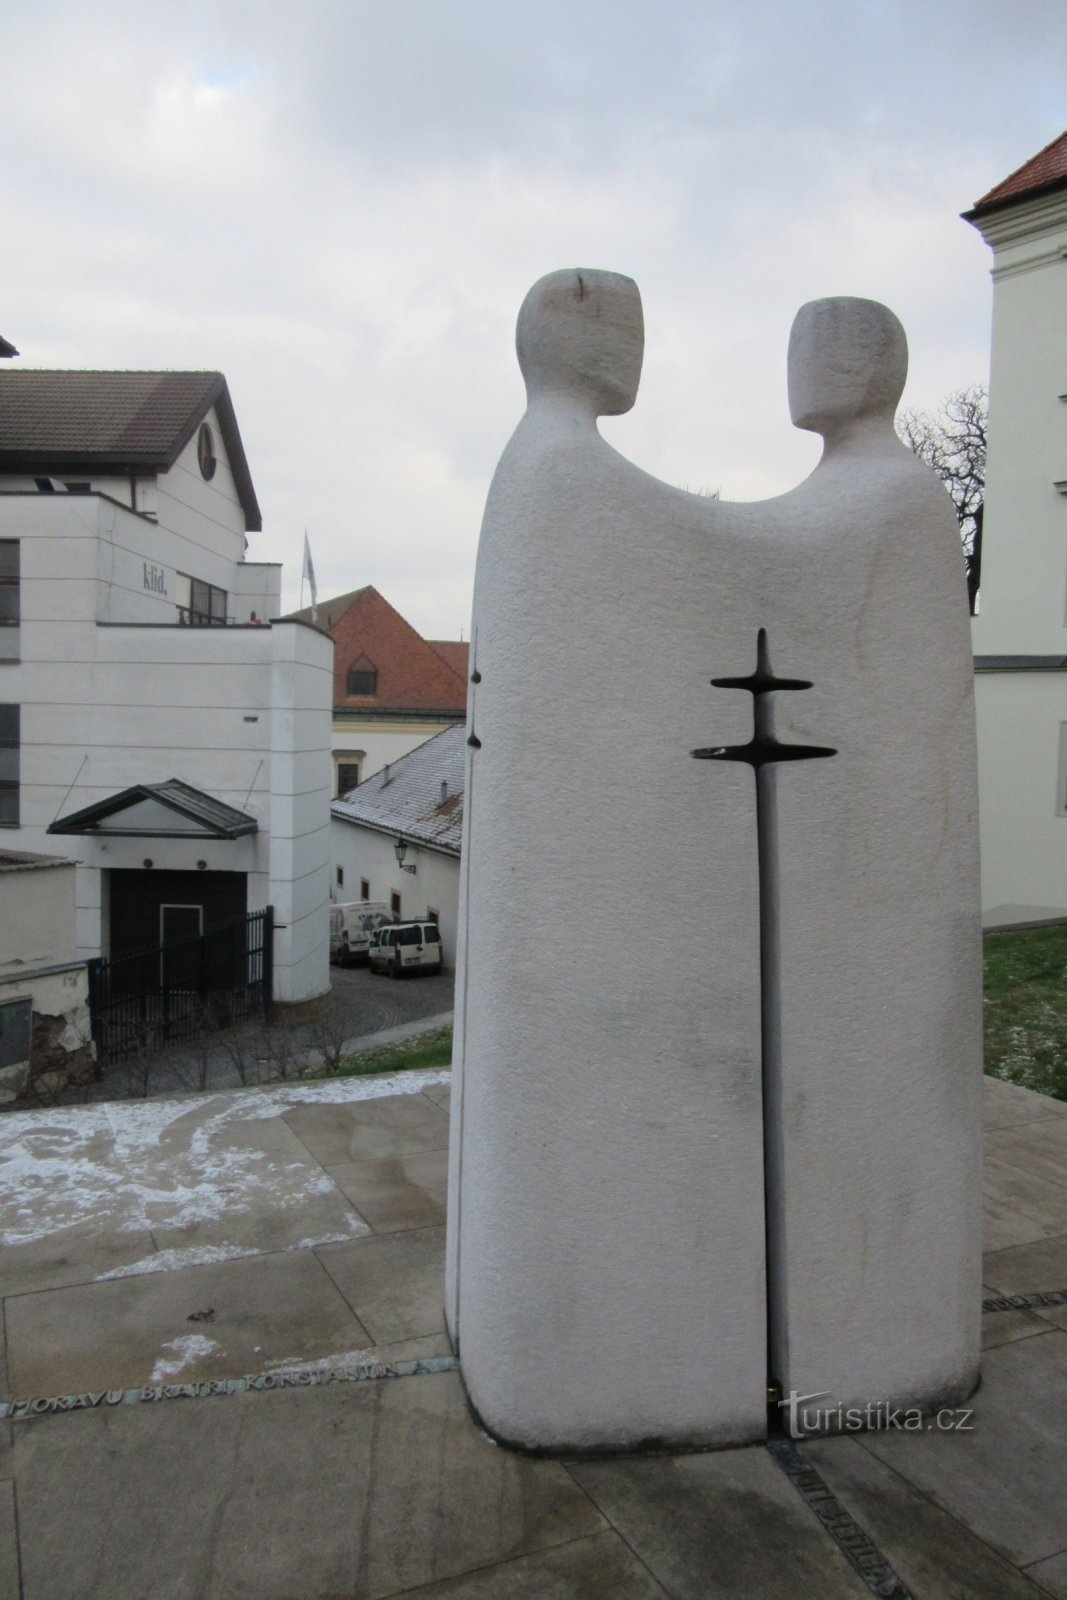 Cyril and Methodius in an embrace